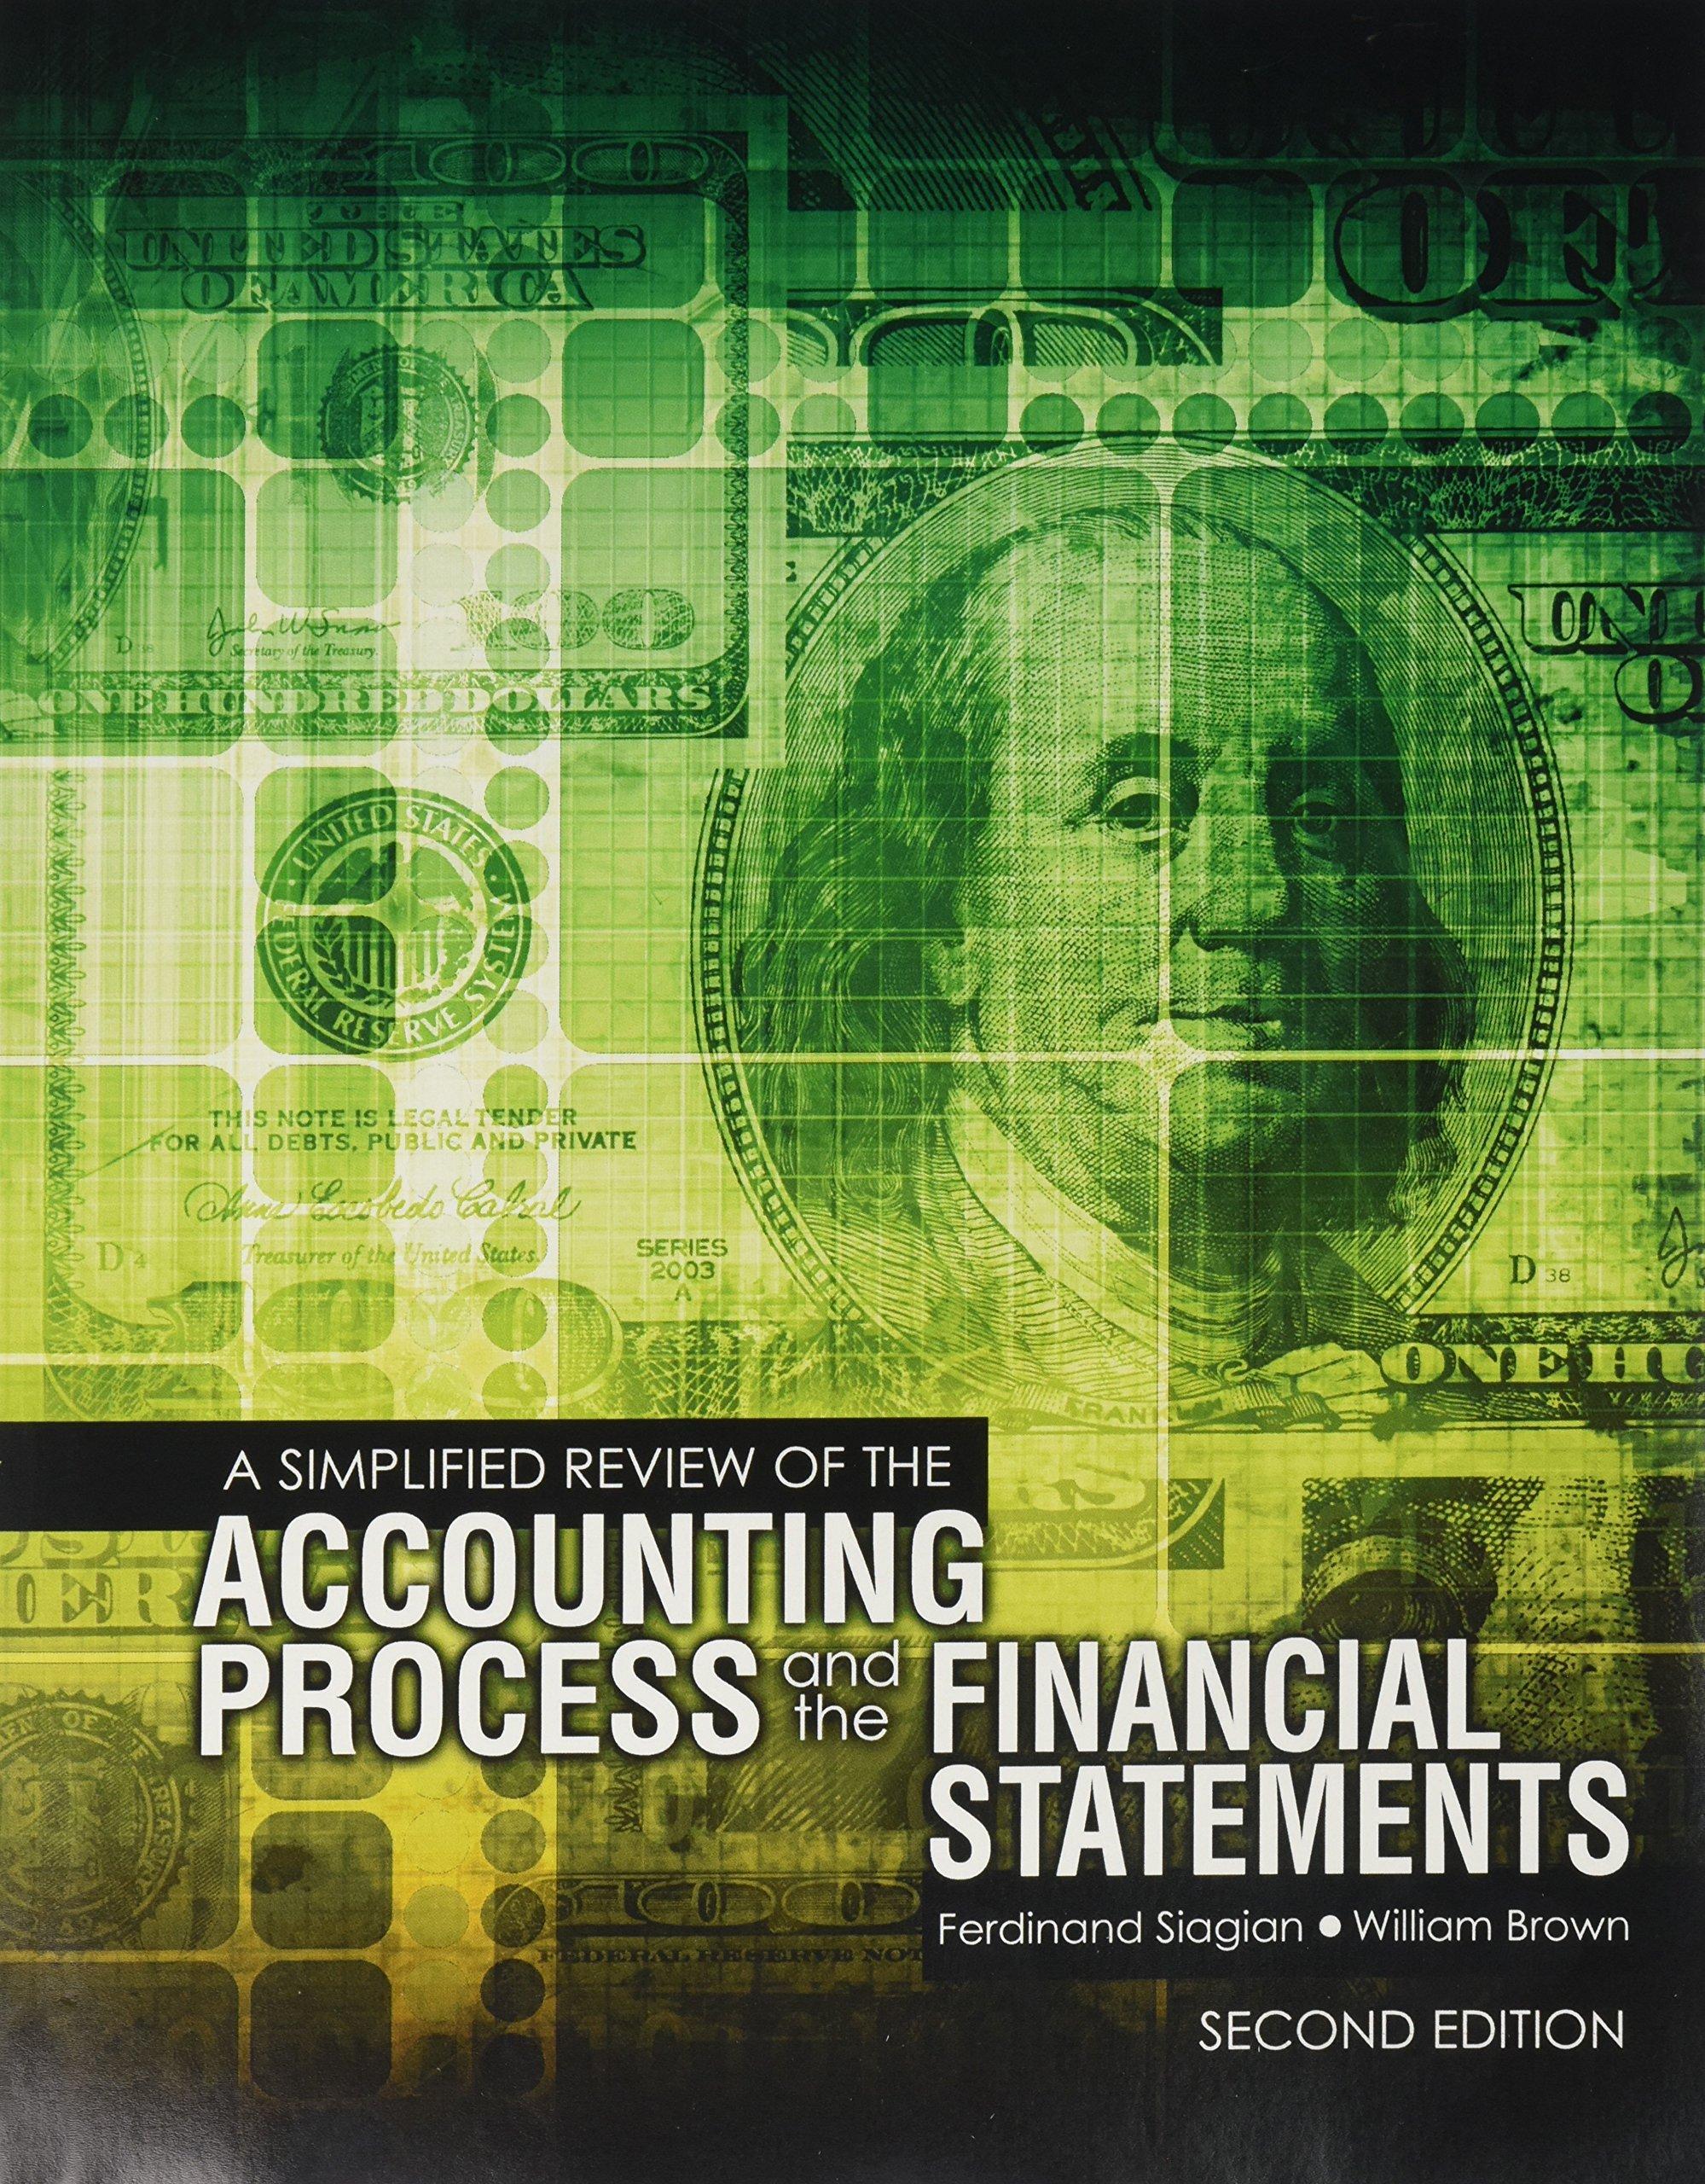 a simplified review of the accounting process and the financial statements 2nd edition ferdinand t. siagian,